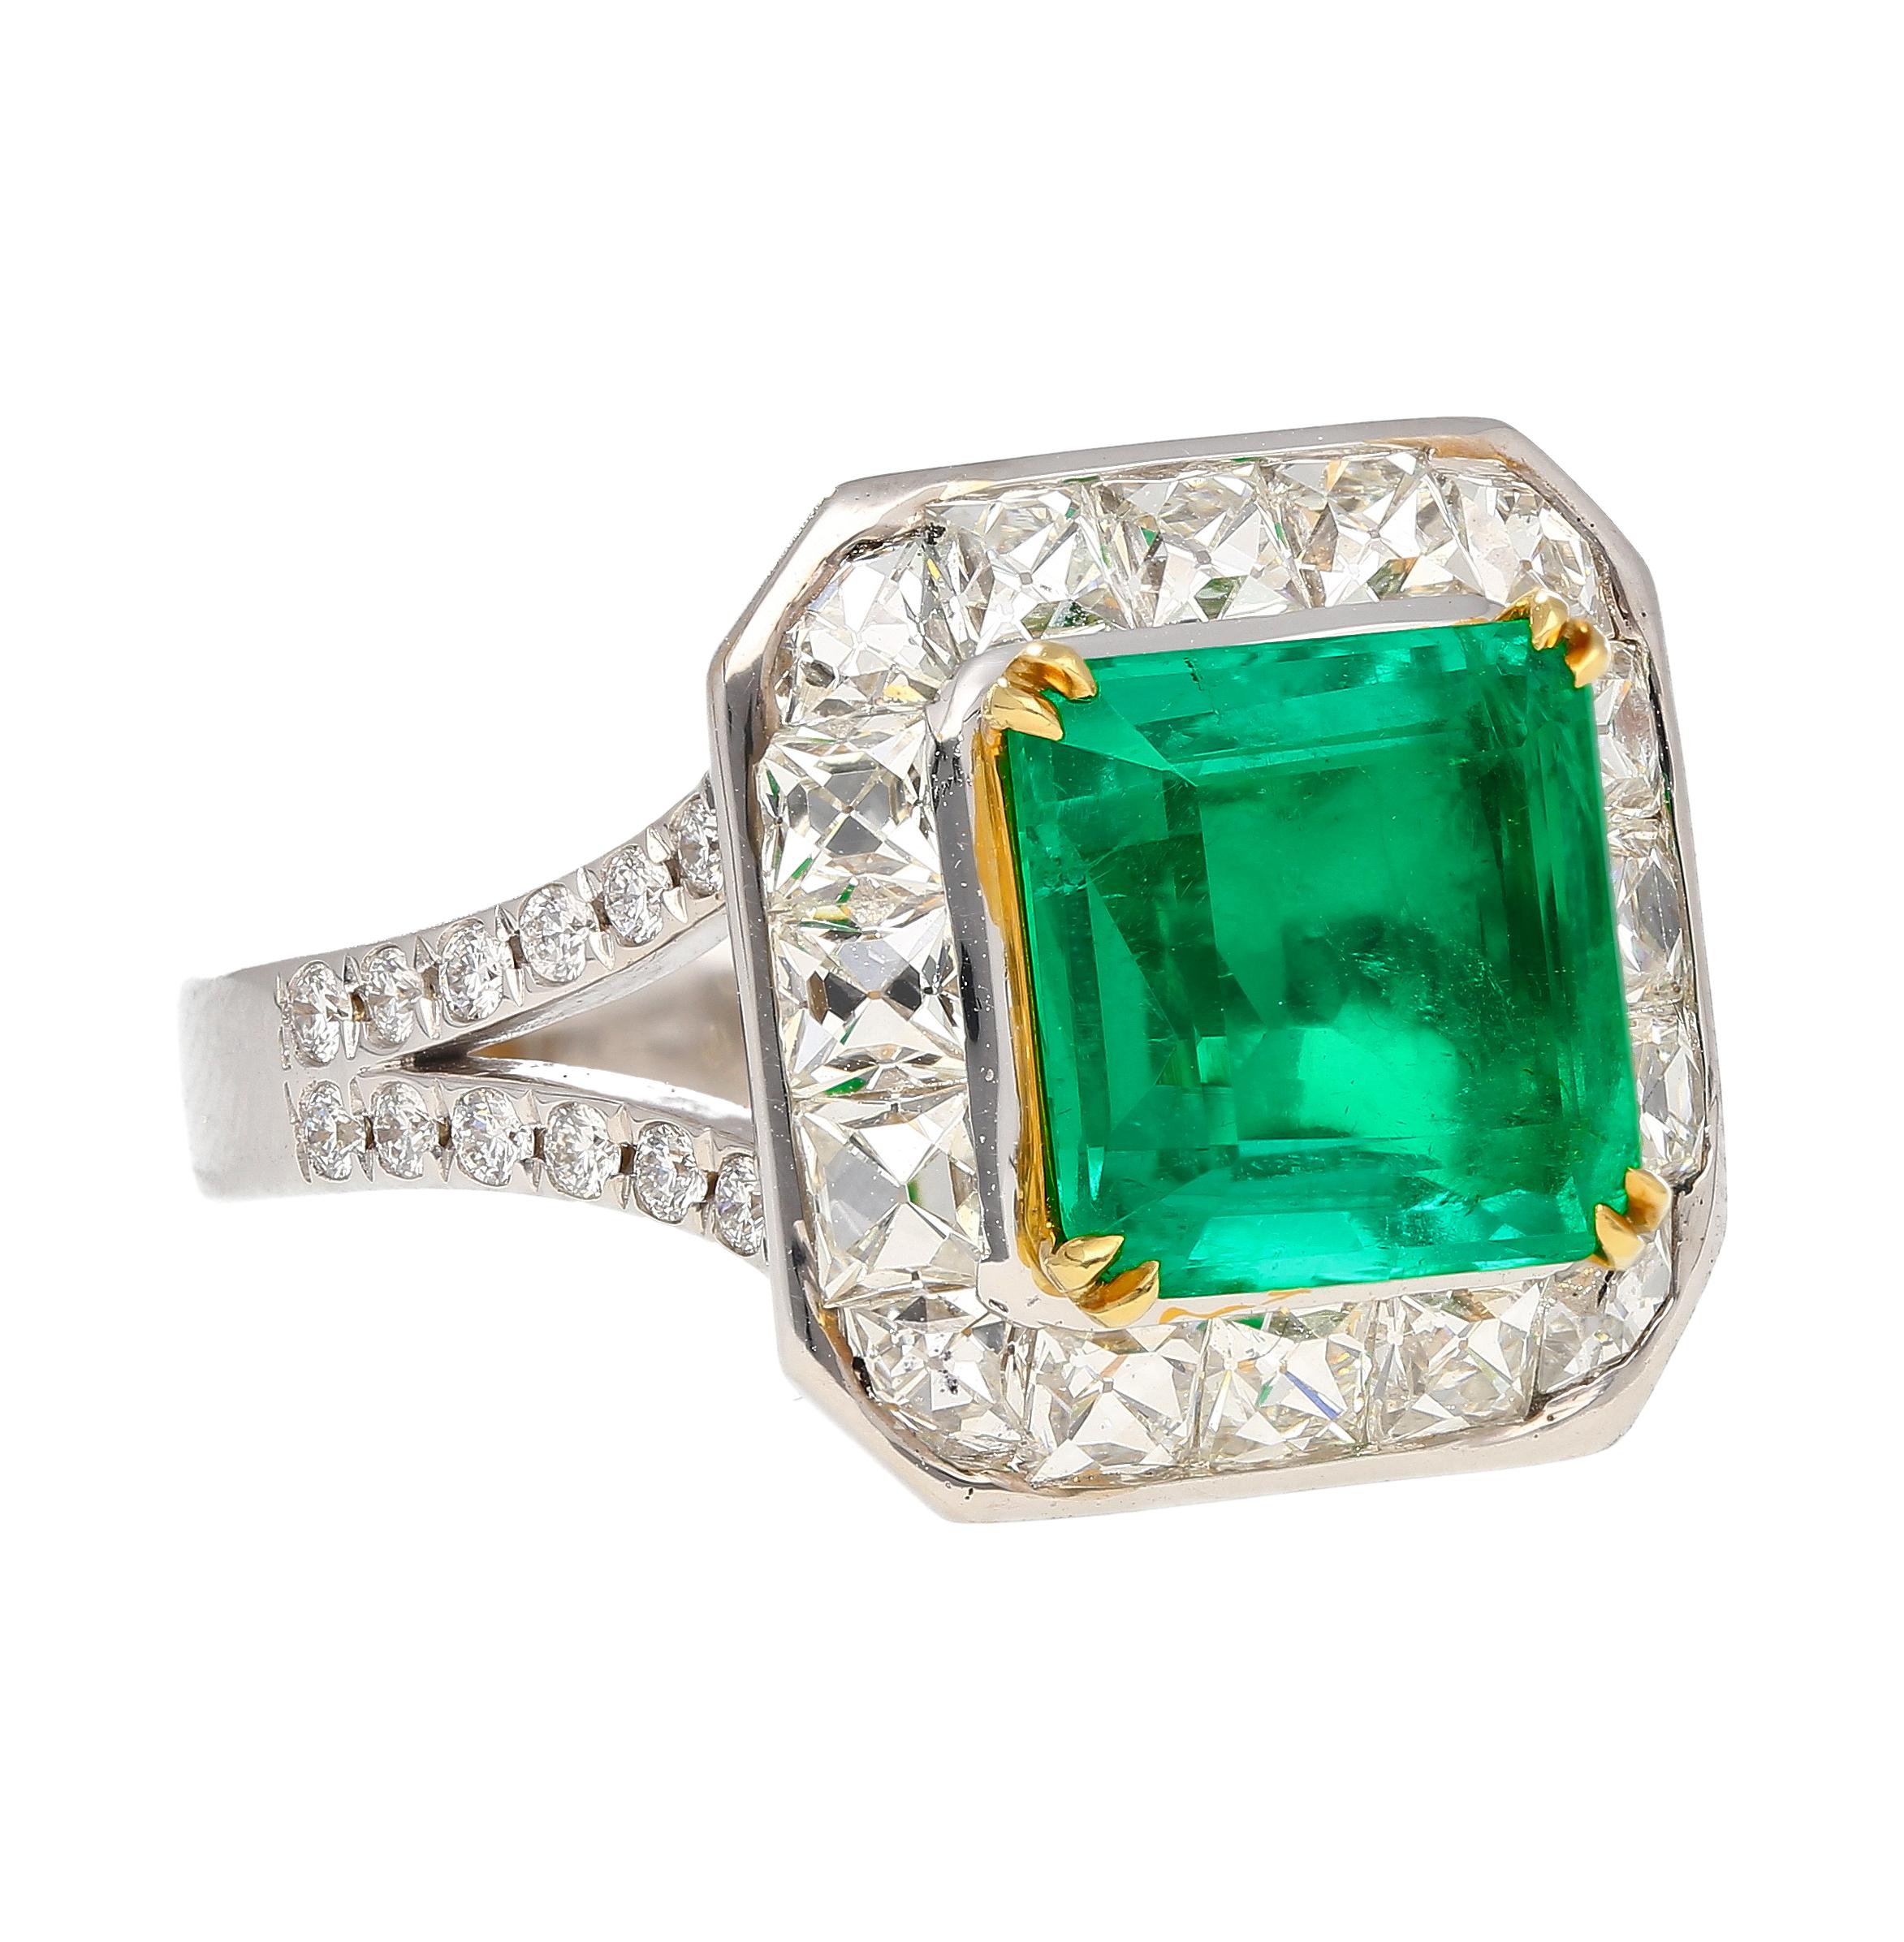 AGL Certified No Oil 2.54 Carat Colombian Emerald and French Old Cut Diamond Halo Ring in 18K White and Yellow Gold.

The emerald center stone is a true marvel of nature. An untreated Colombian natural emerald with fantastic luster and crystal. The